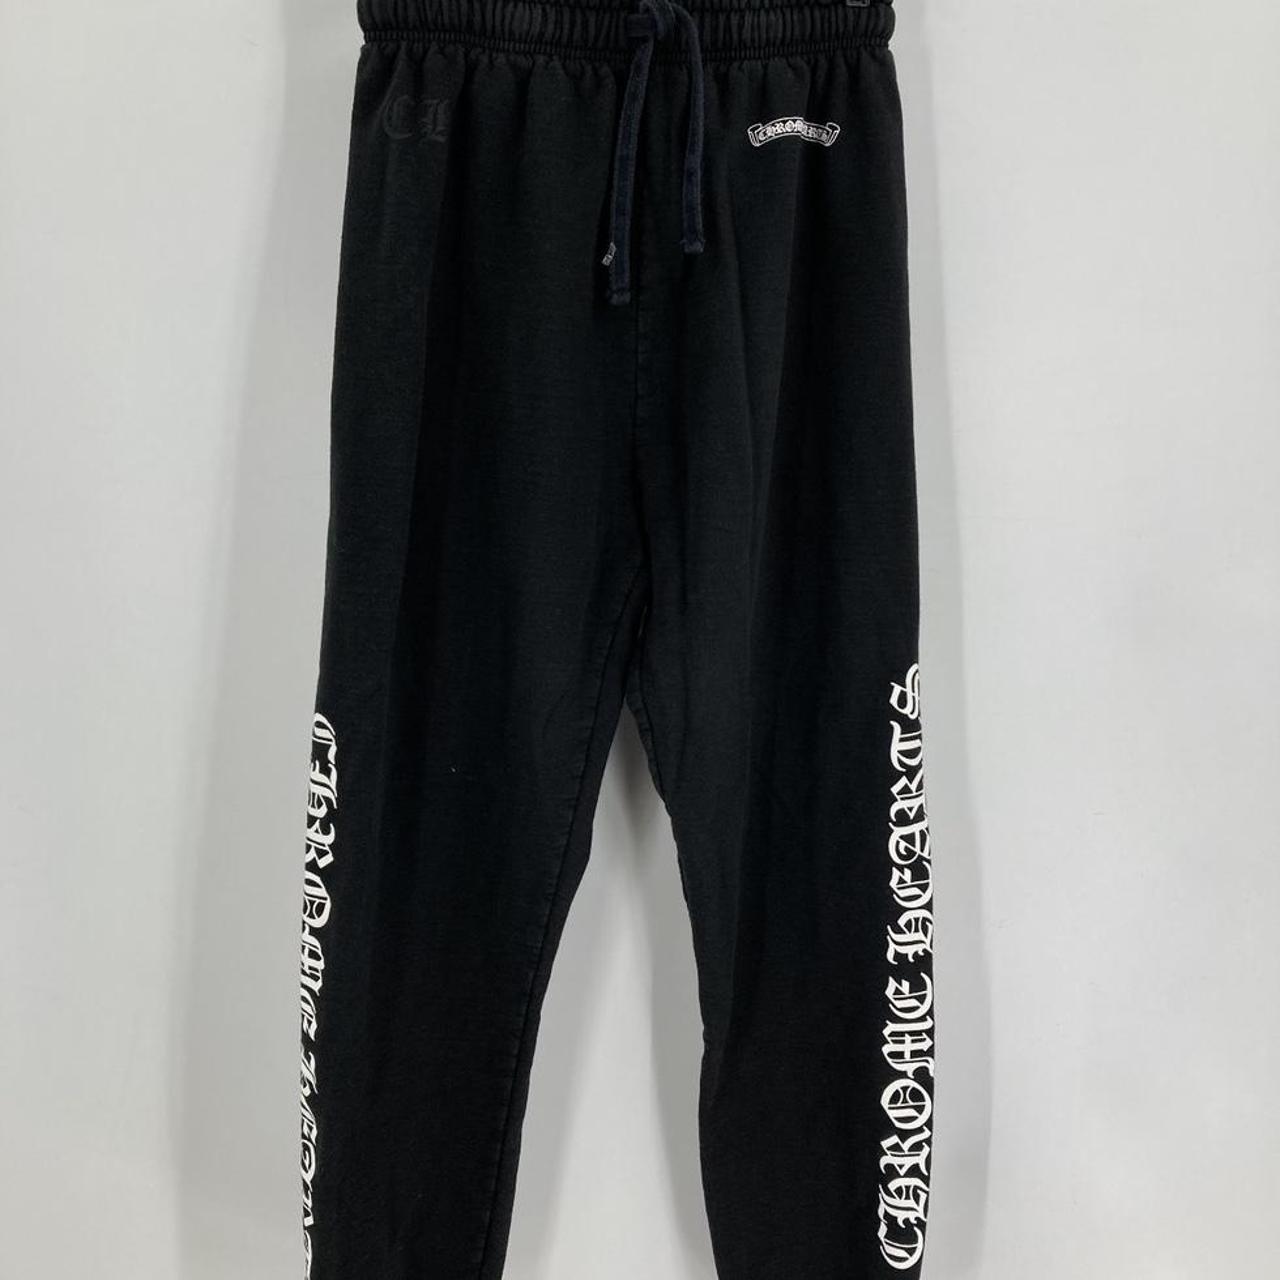 Chrome Hearts Men's Black and White Joggers-tracksuits | Depop